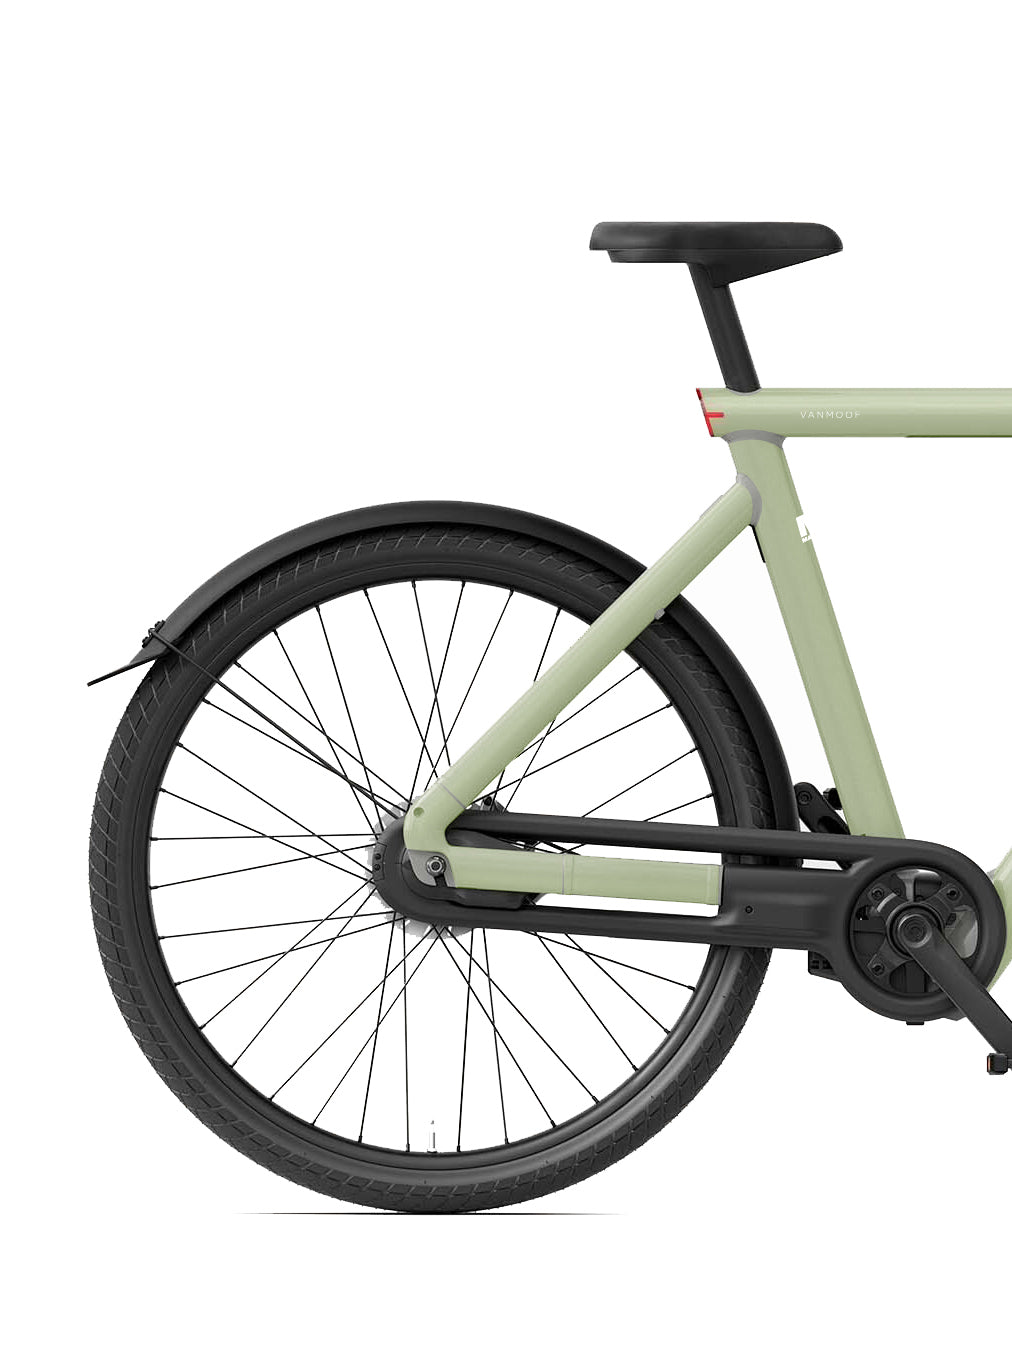 OLIVE GREEN PROTECT KIT FOR VANMOOF S5